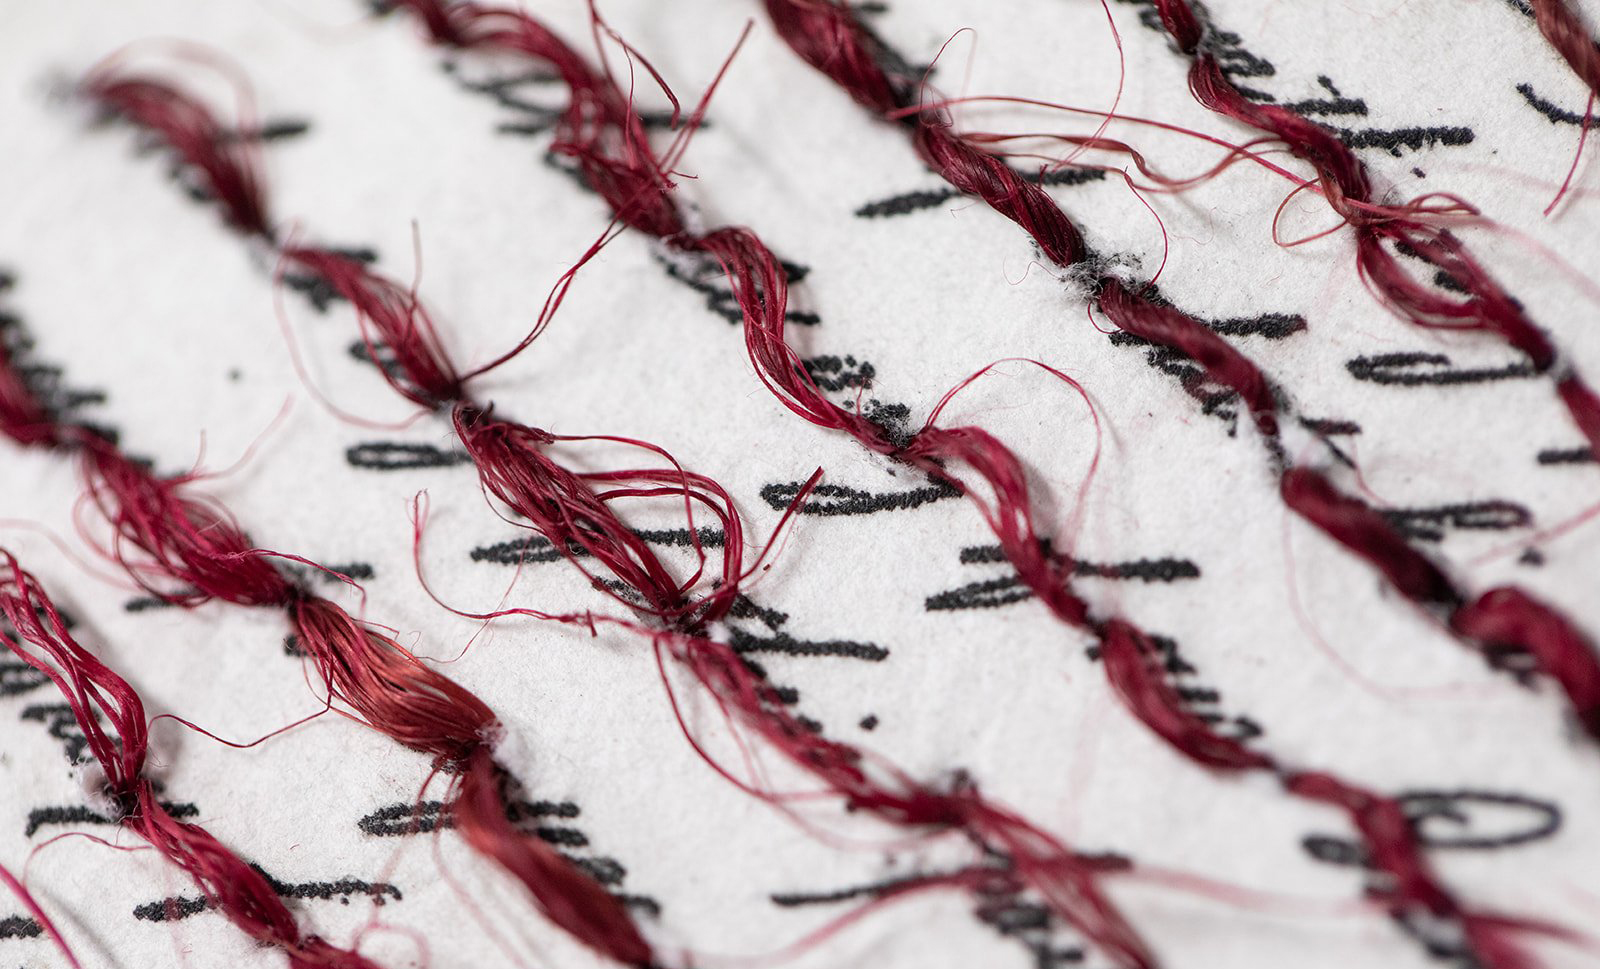 A close up image of black script with red thread loosely stitched through them.